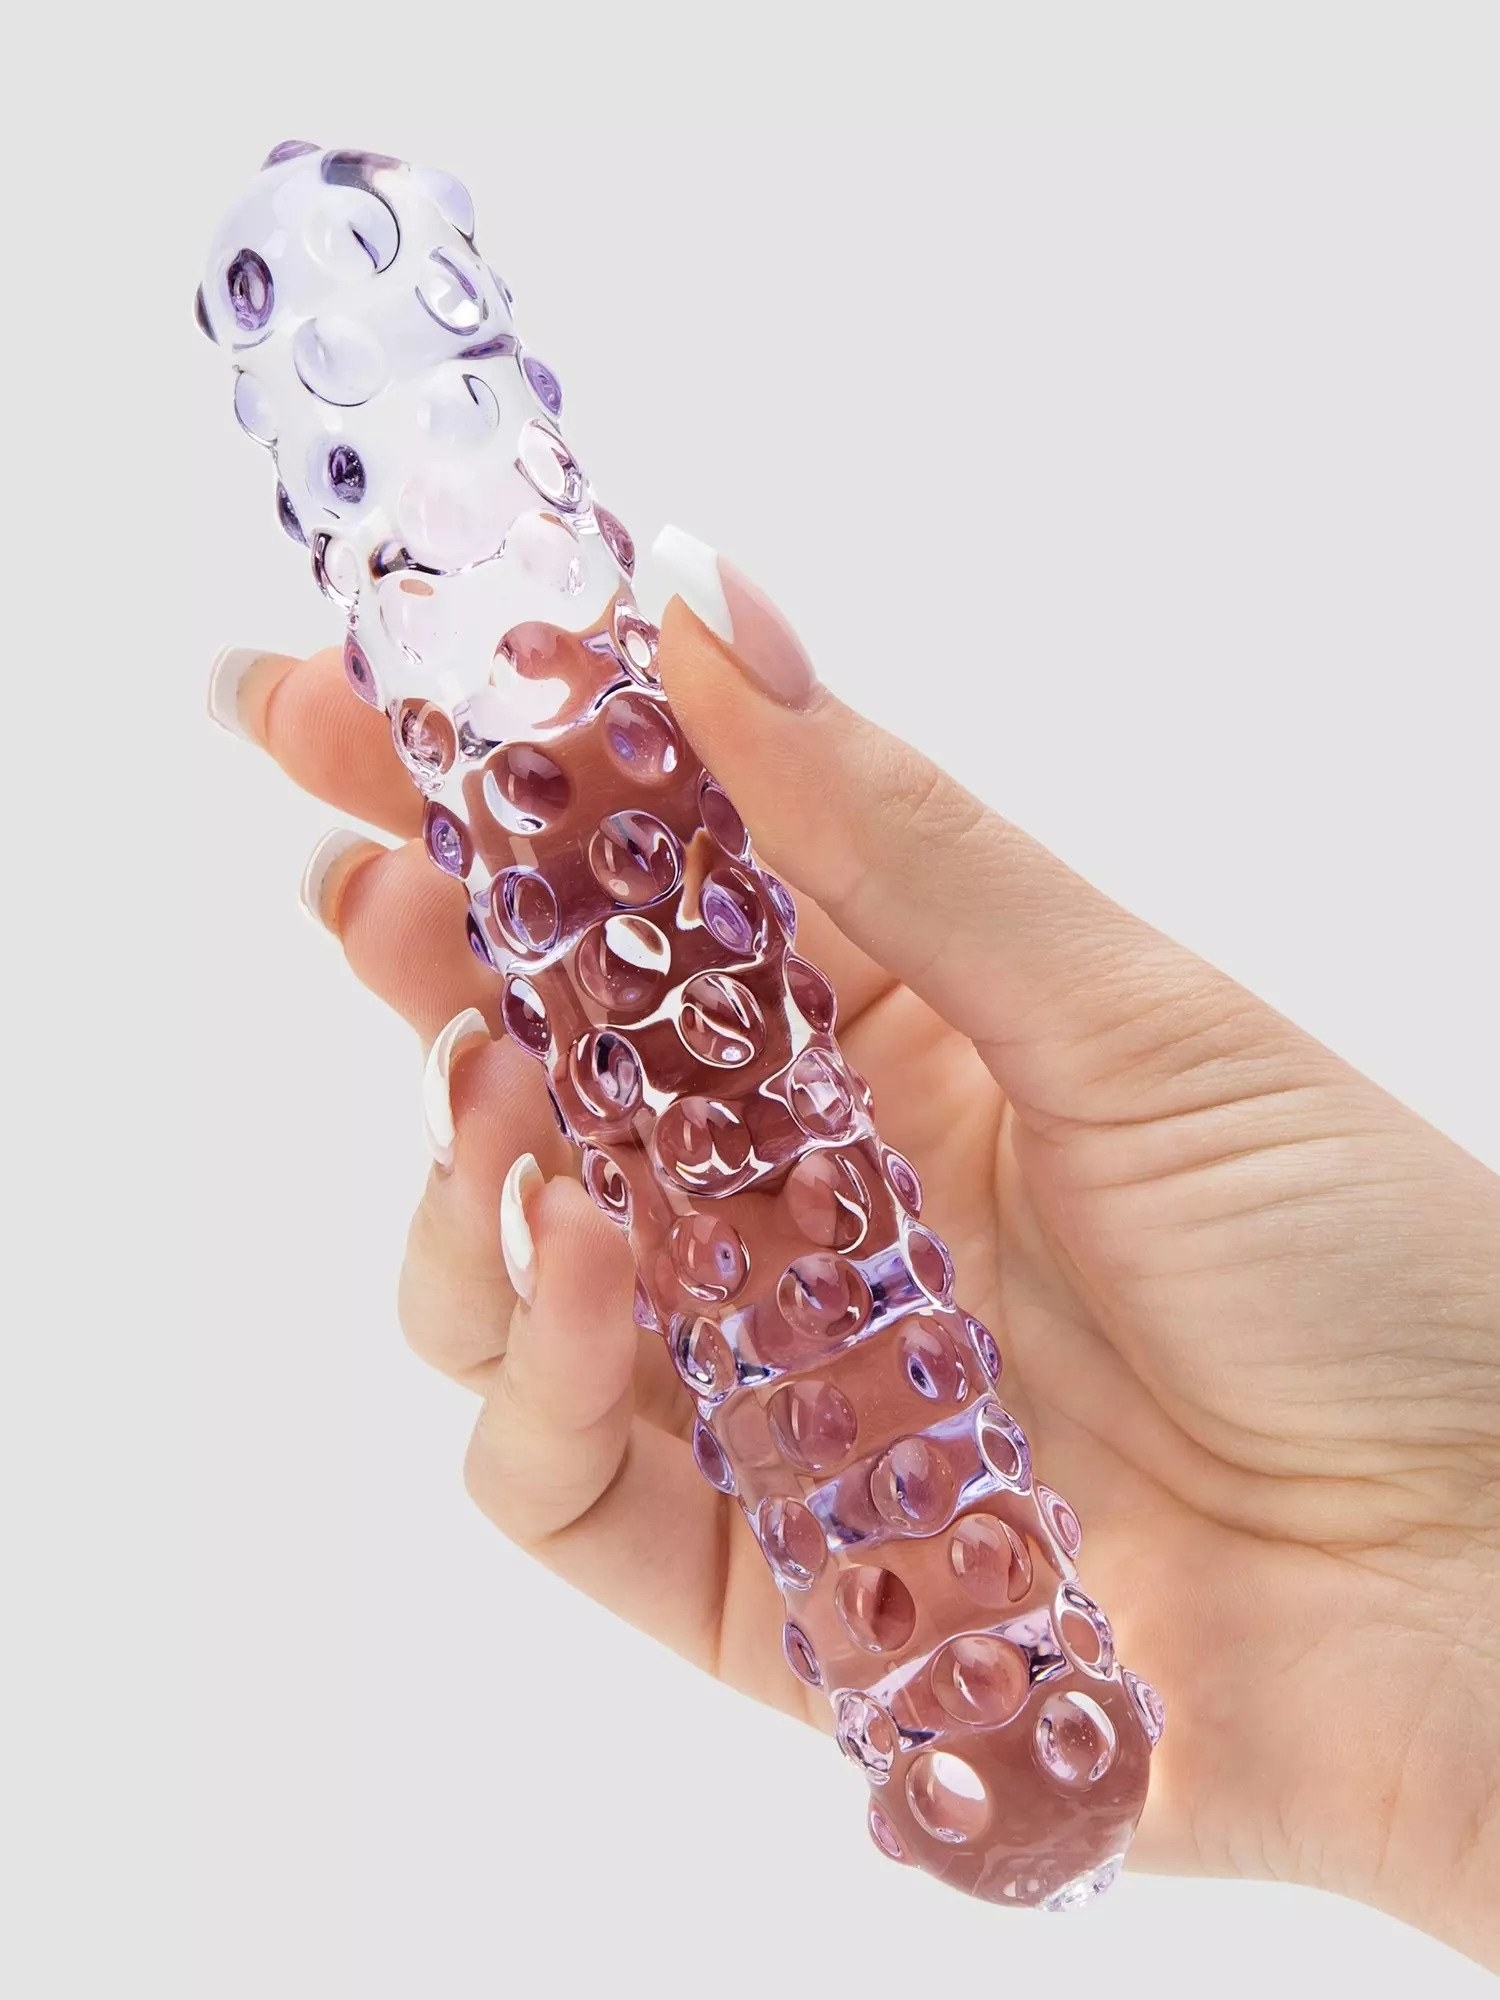 hand holding cylindrical transparent toy